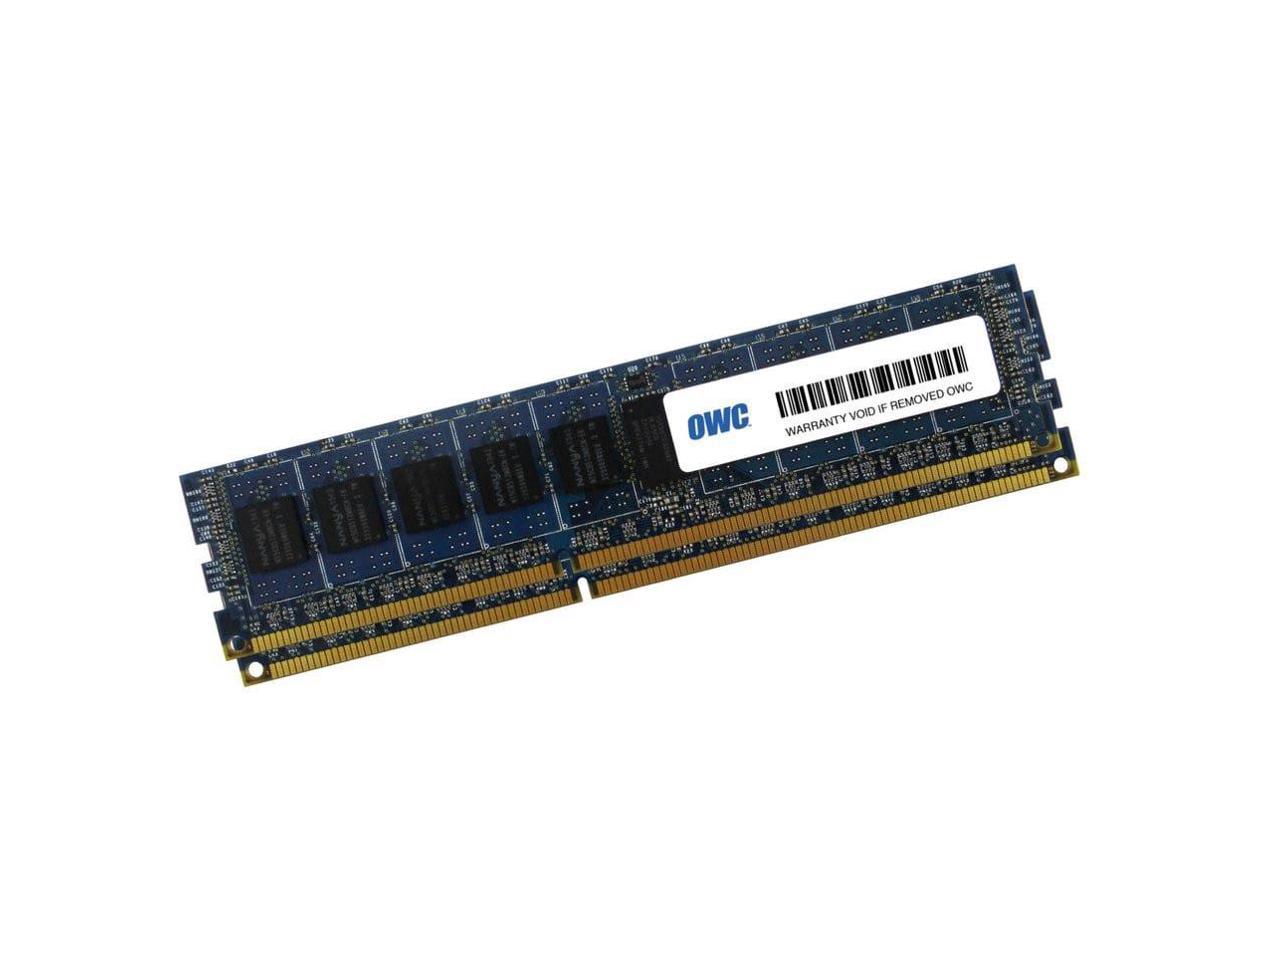 OWC 16GB ( 2x8GB ) PC3-10600 DDR3 ECC 1333MHz SDRAM DIMM 240 Pin Memory Upgrade kit For Mac Pro 'Nehalem' & 'Westmere' models. Perfect For the Mac Pro 8-core and Quad-core Xeon systems. Model OWC1333D